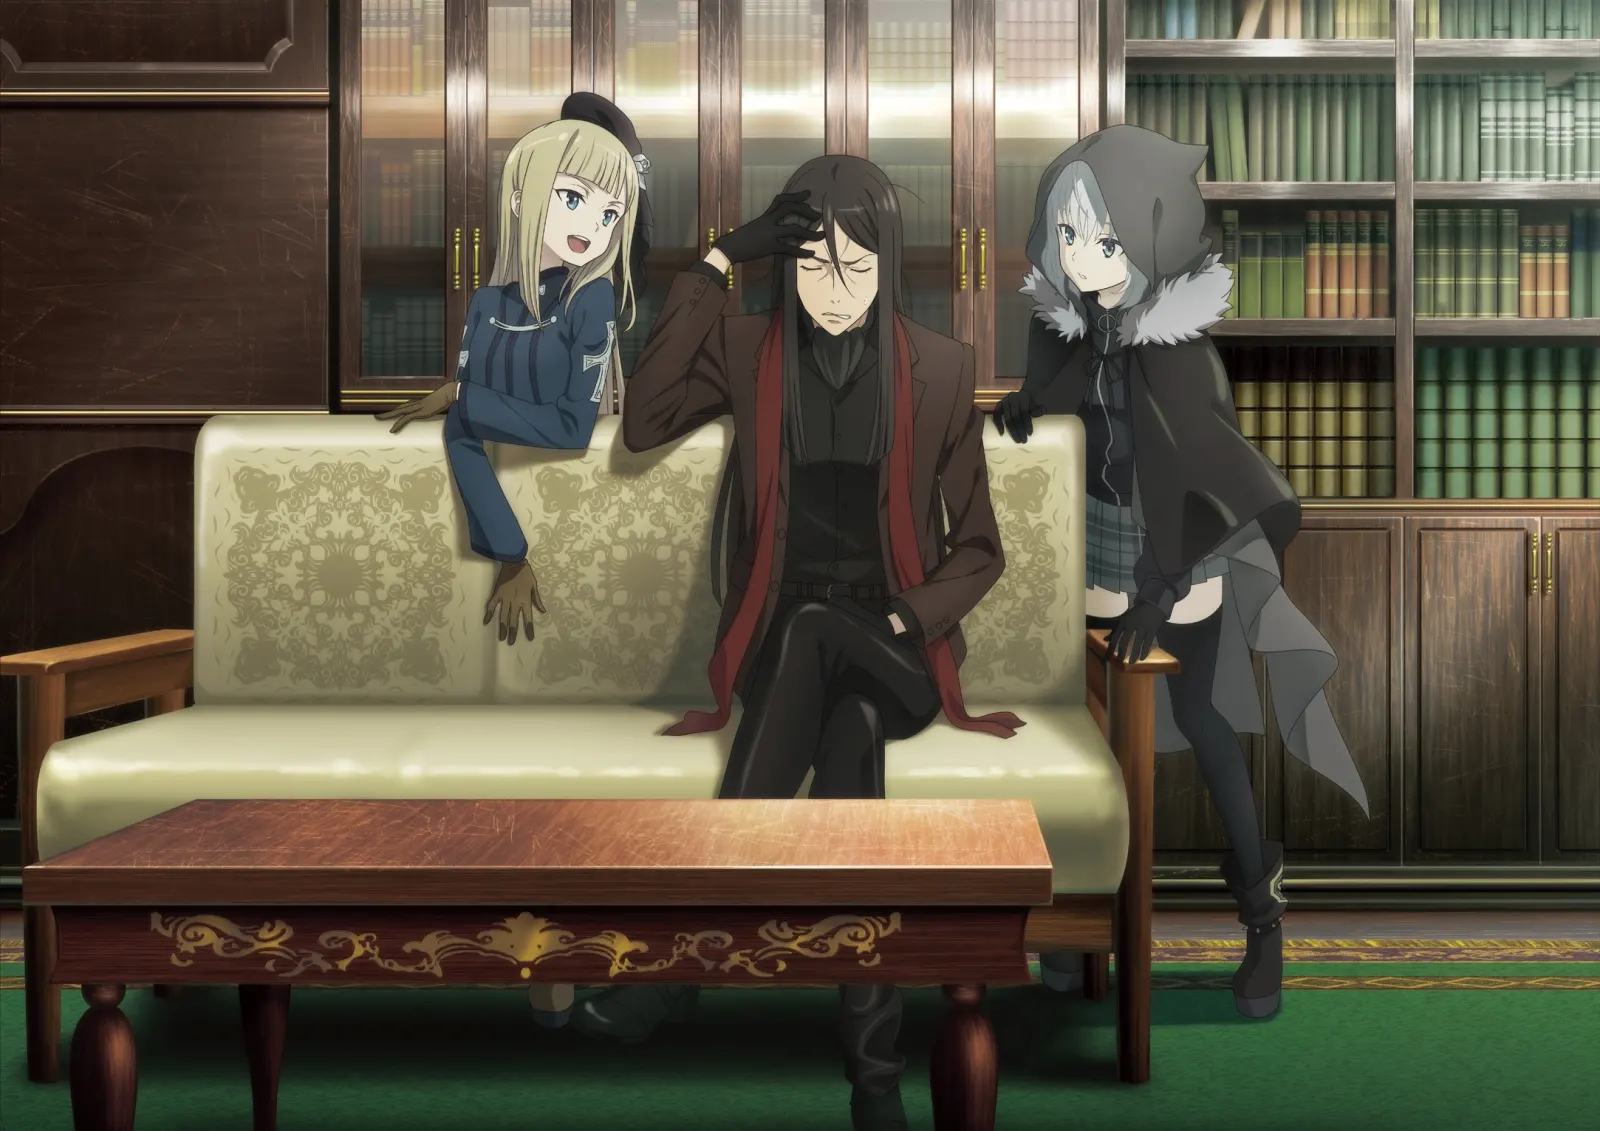 Waver’s typical expression is exasperation... especially around young women.